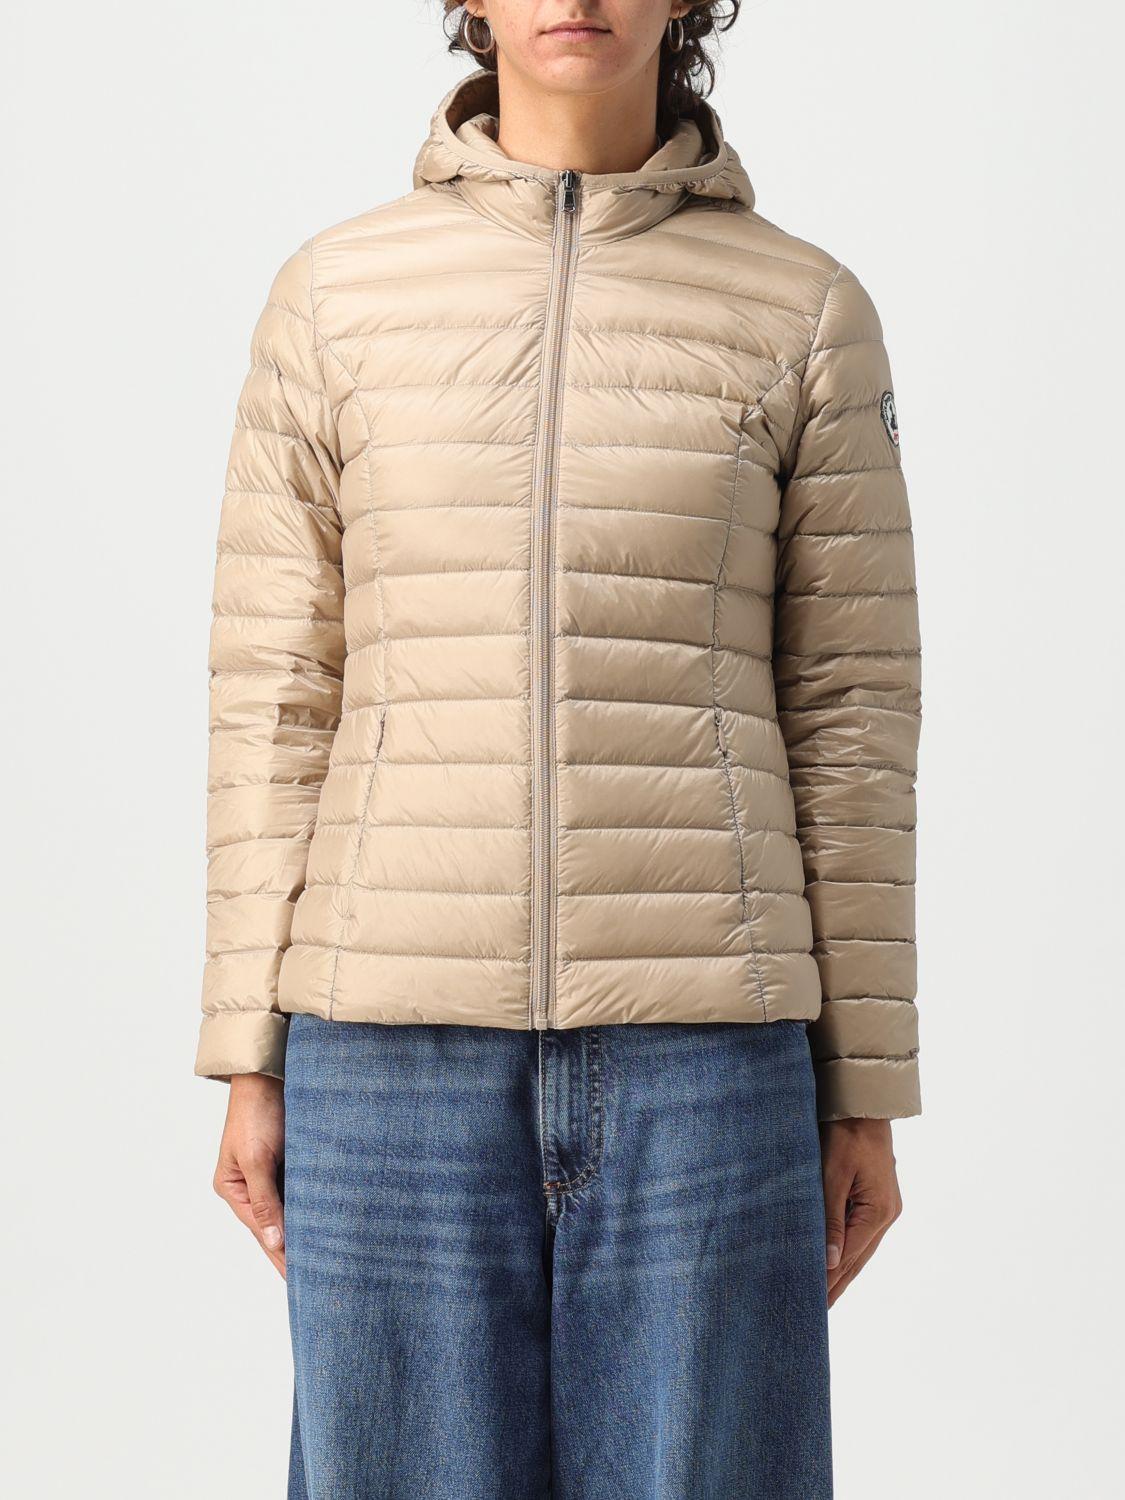 J.O.T.T Jacket in Natural | Lyst